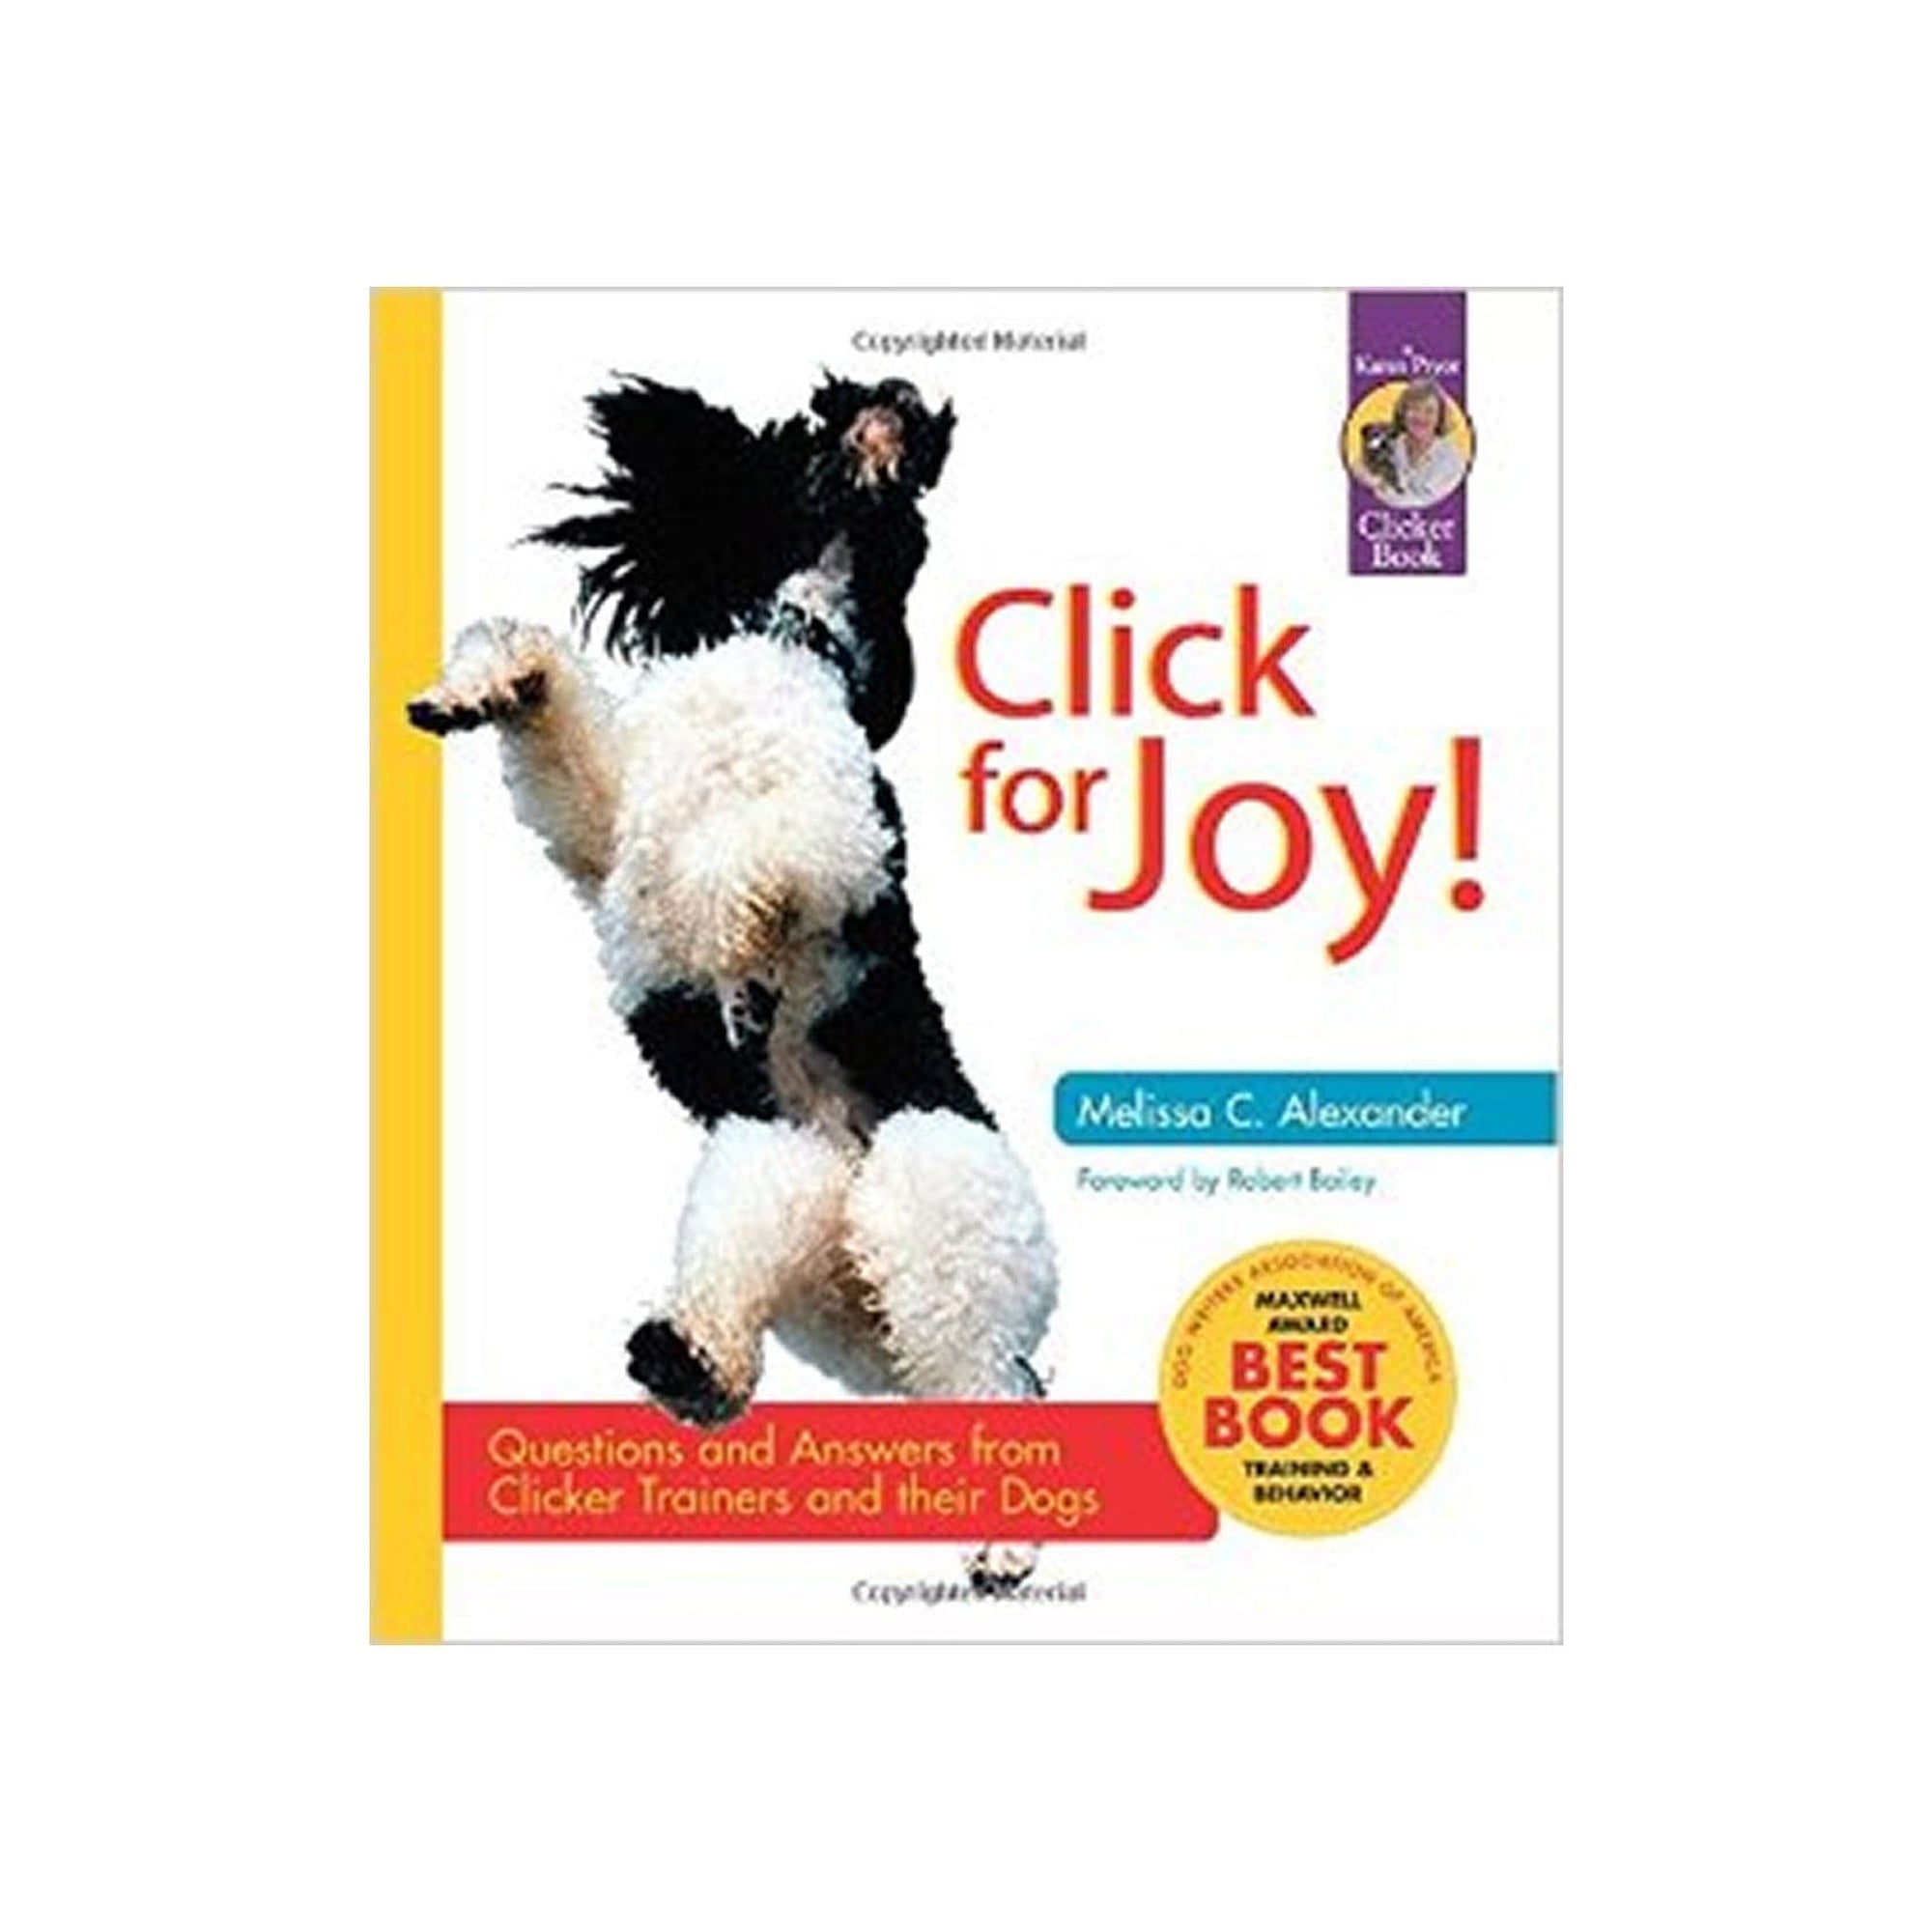 E-BOOK Click For Joy! Questions and Answers From Clicker Trainers and their Dogs by Melissa C. Alexander